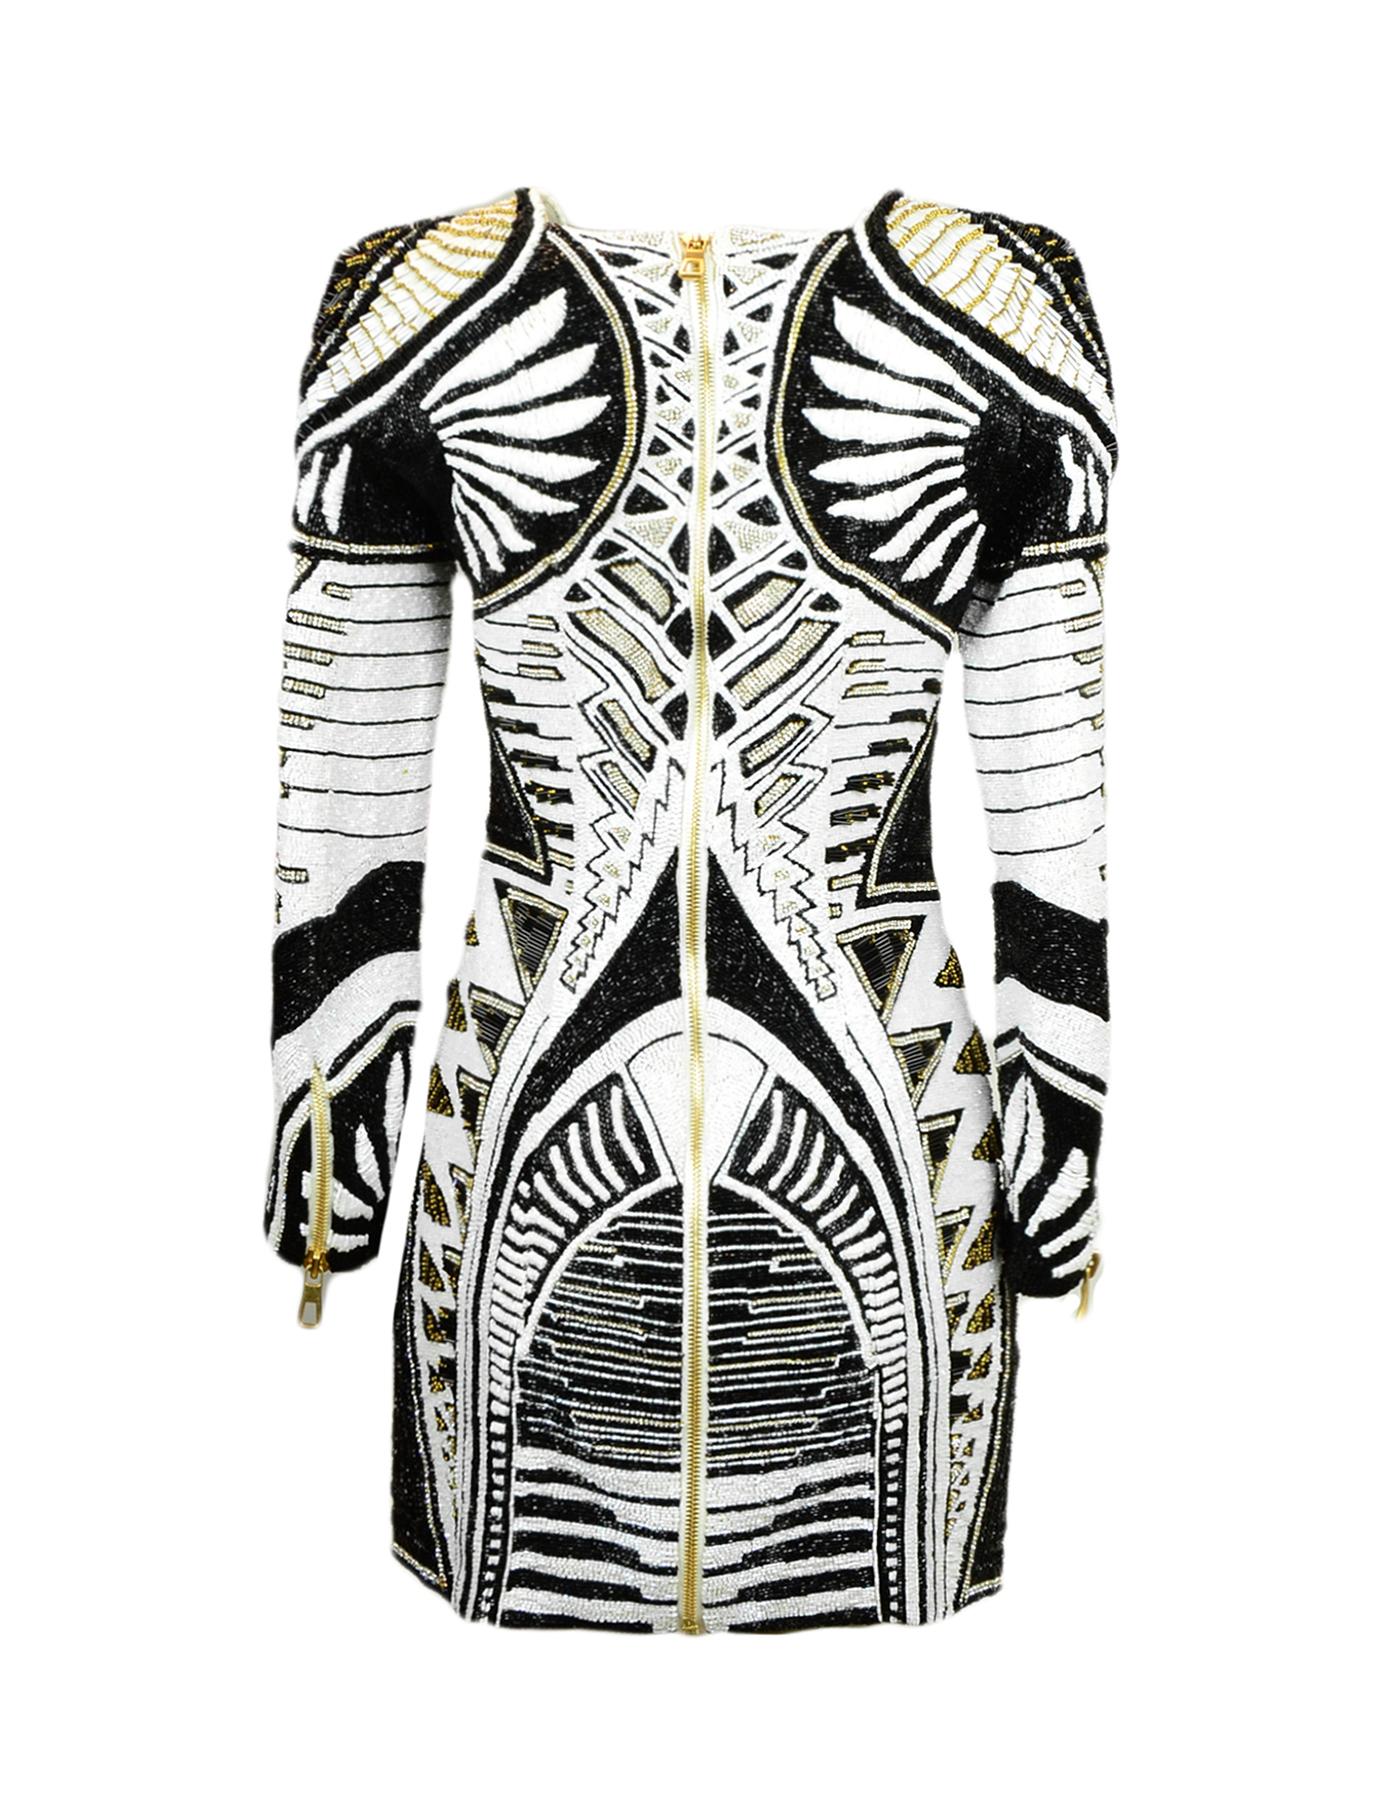 Limited Edition Balmain x H&M Black/White Beaded Longsleeve Mini Dress.  Features black and white beading with gold accents and crystals.
Made In: India
Color: Black, white, and gold
Materials: 100% polyester
Lining: 100% viscose
Opening/Closure: